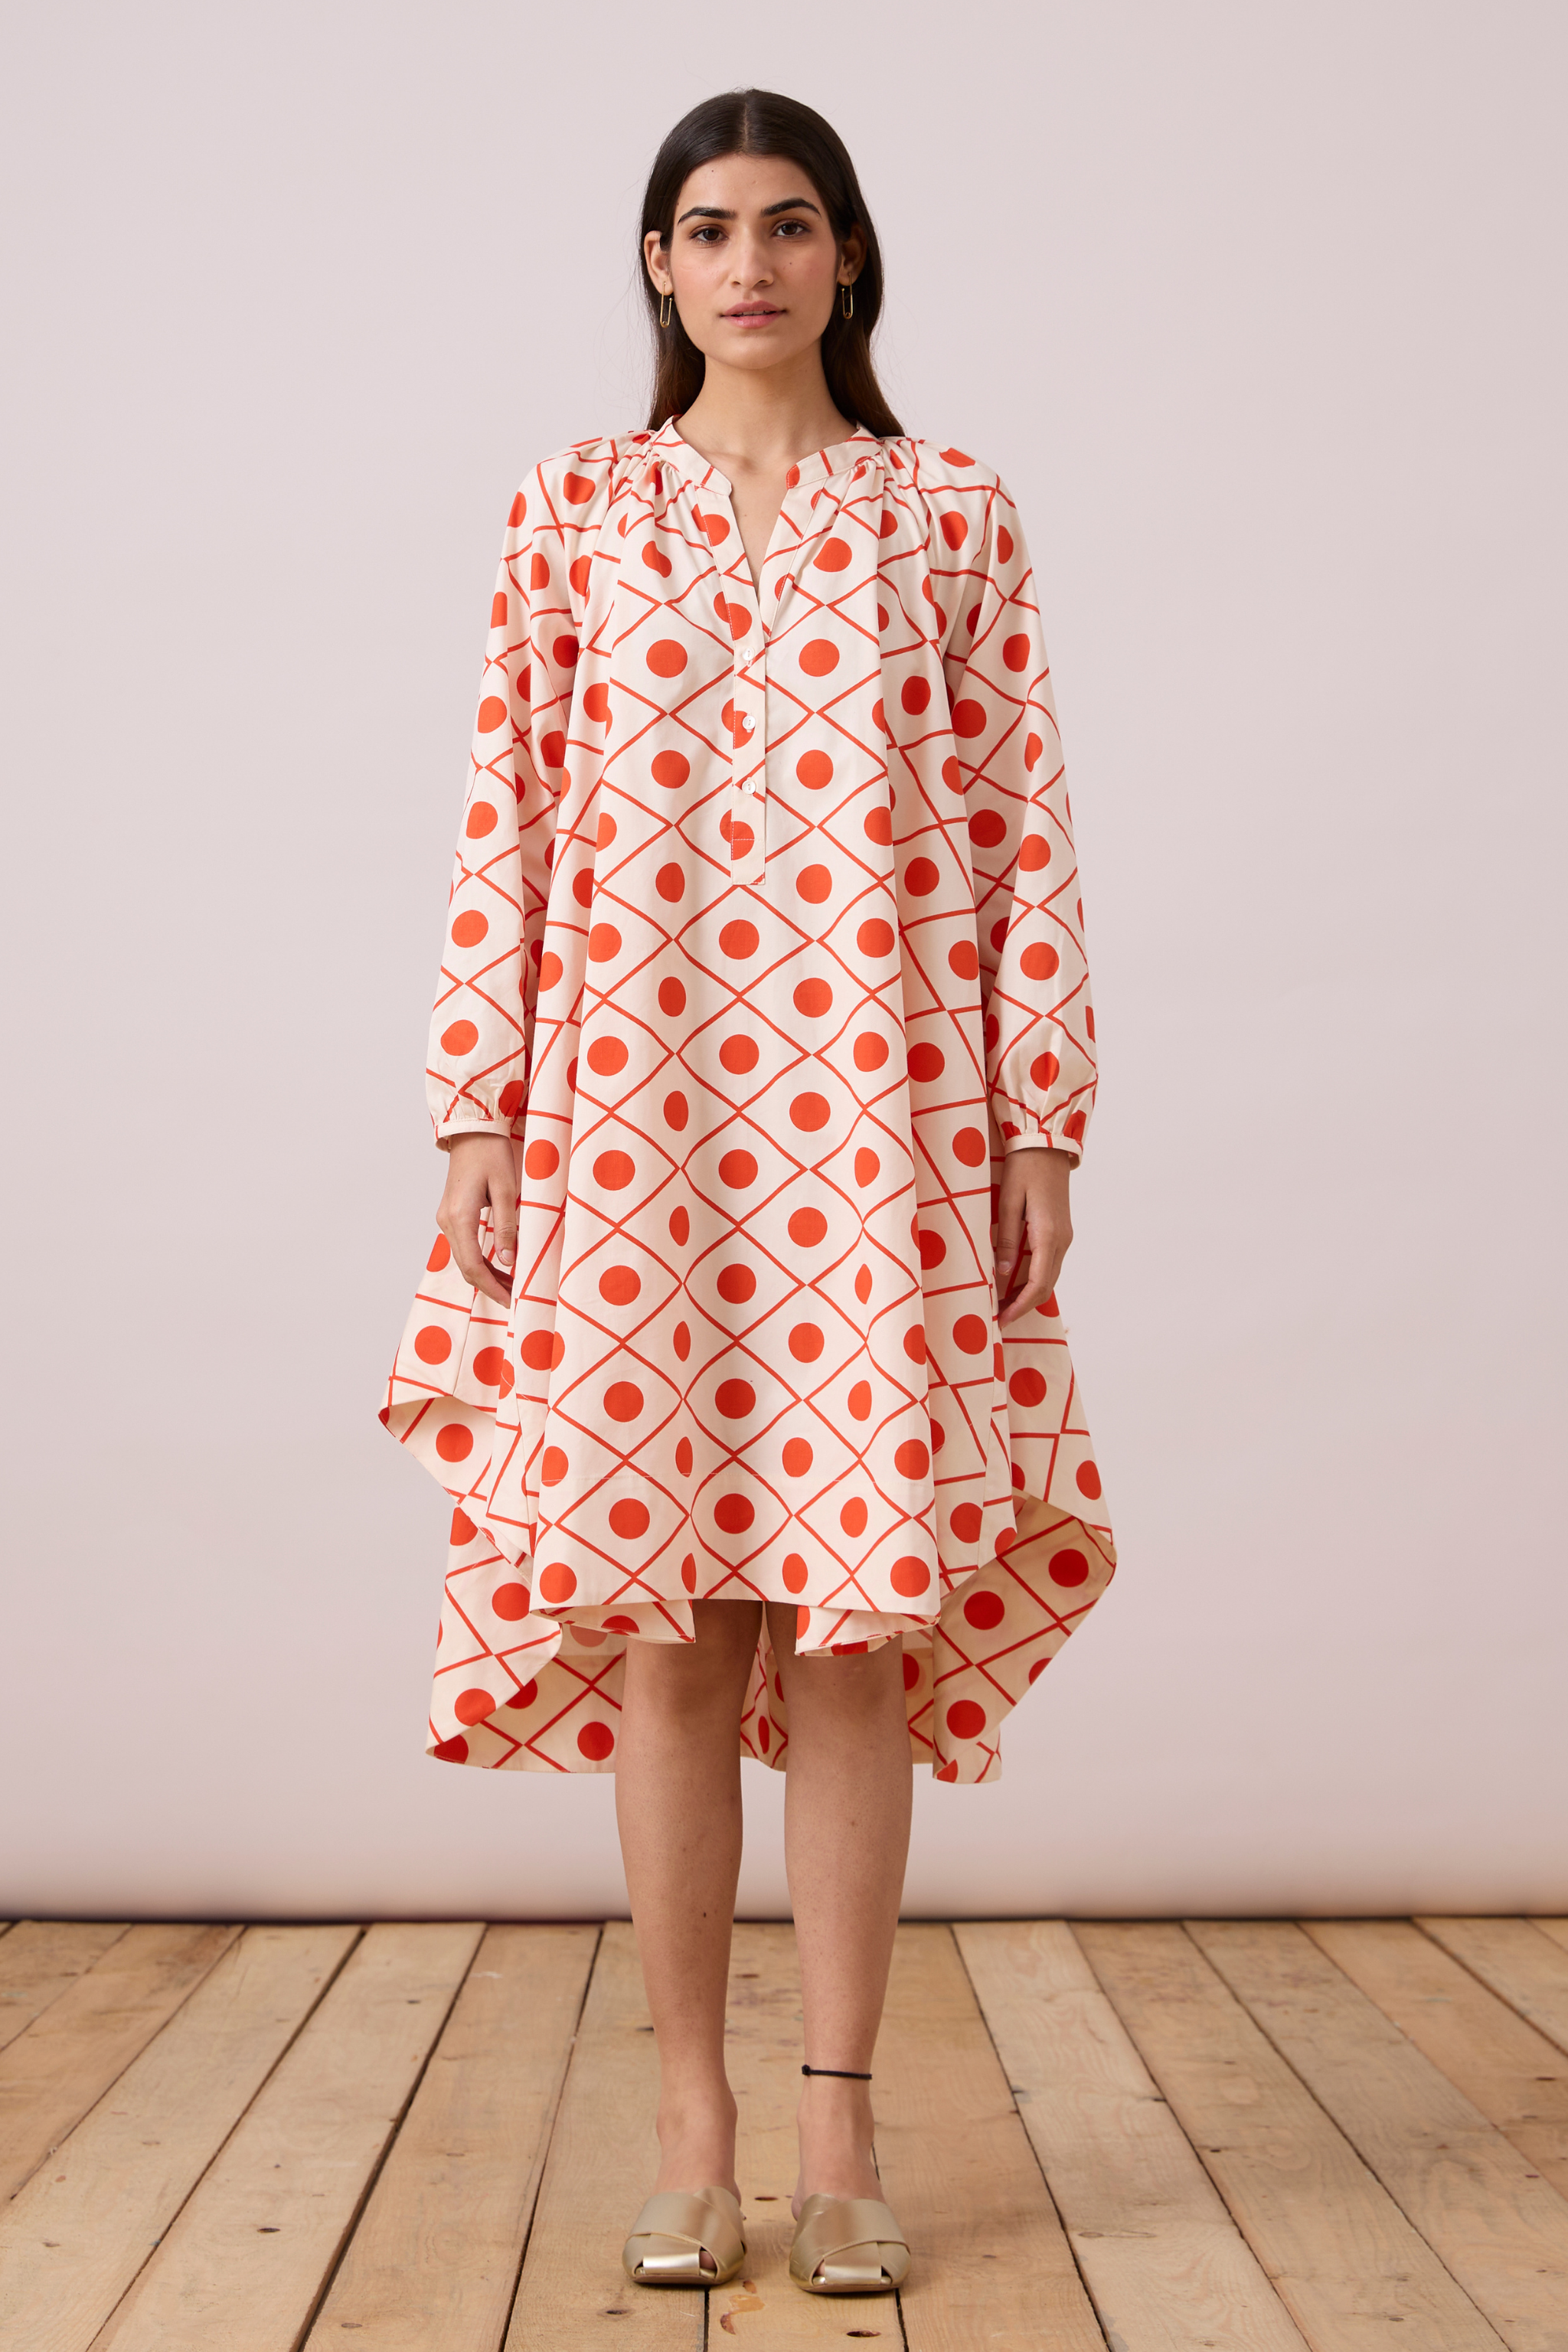 Woodstock - Print, a product by The Summer House